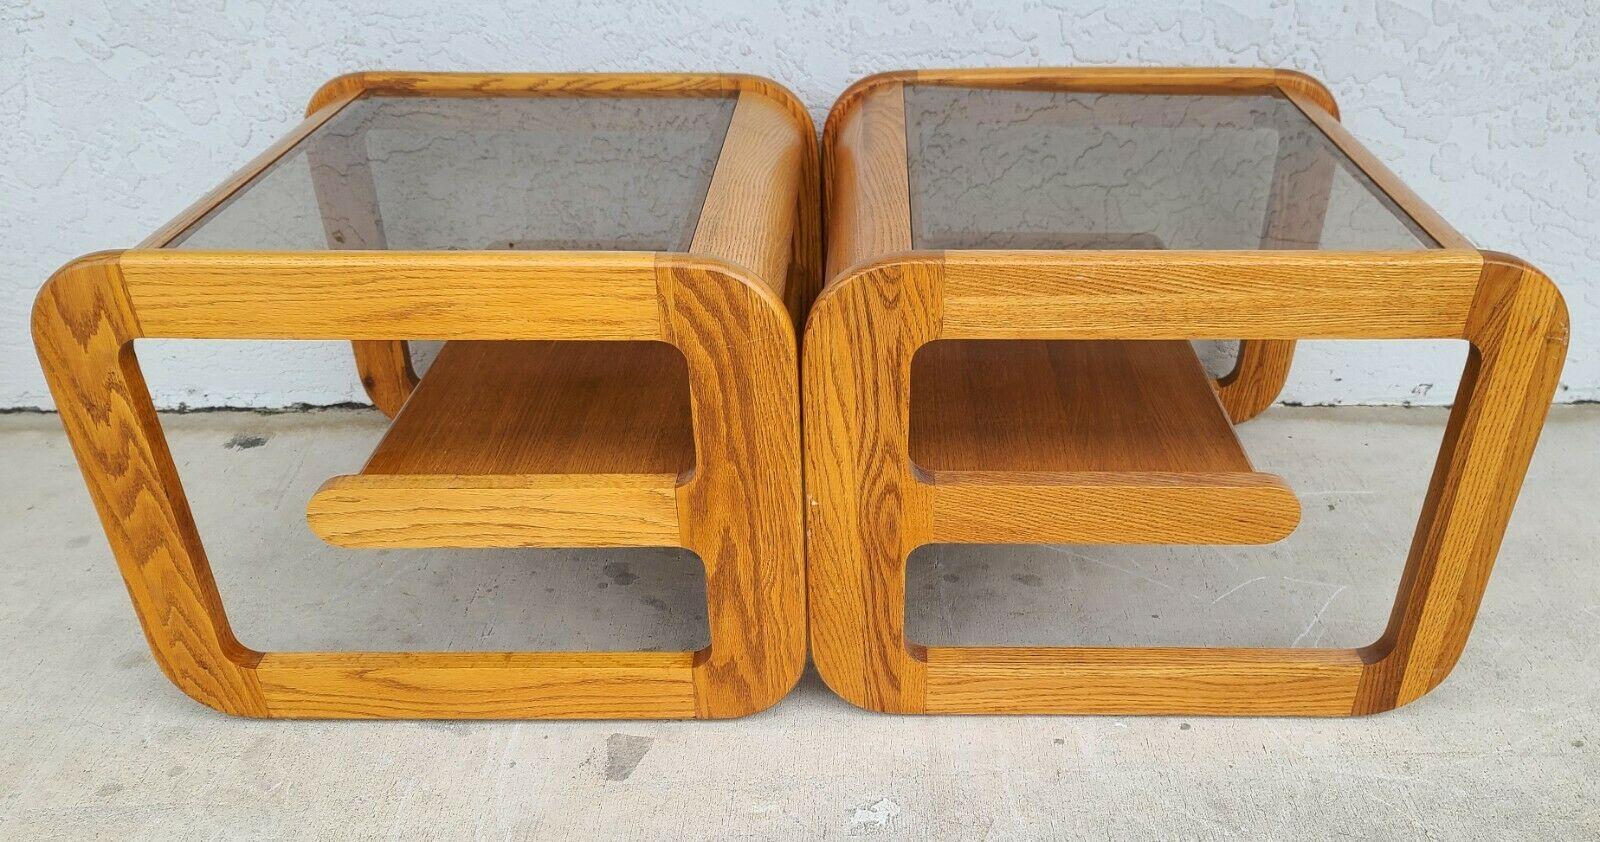 For full item description be sure to click on CONTINUE READING at the bottom of this listing.

Offering one of our recent palm beach estate fine furniture acquisitions of a
set of (2) 1970's Mid-Century Modern Lou Hodges Mersman style oak smoked